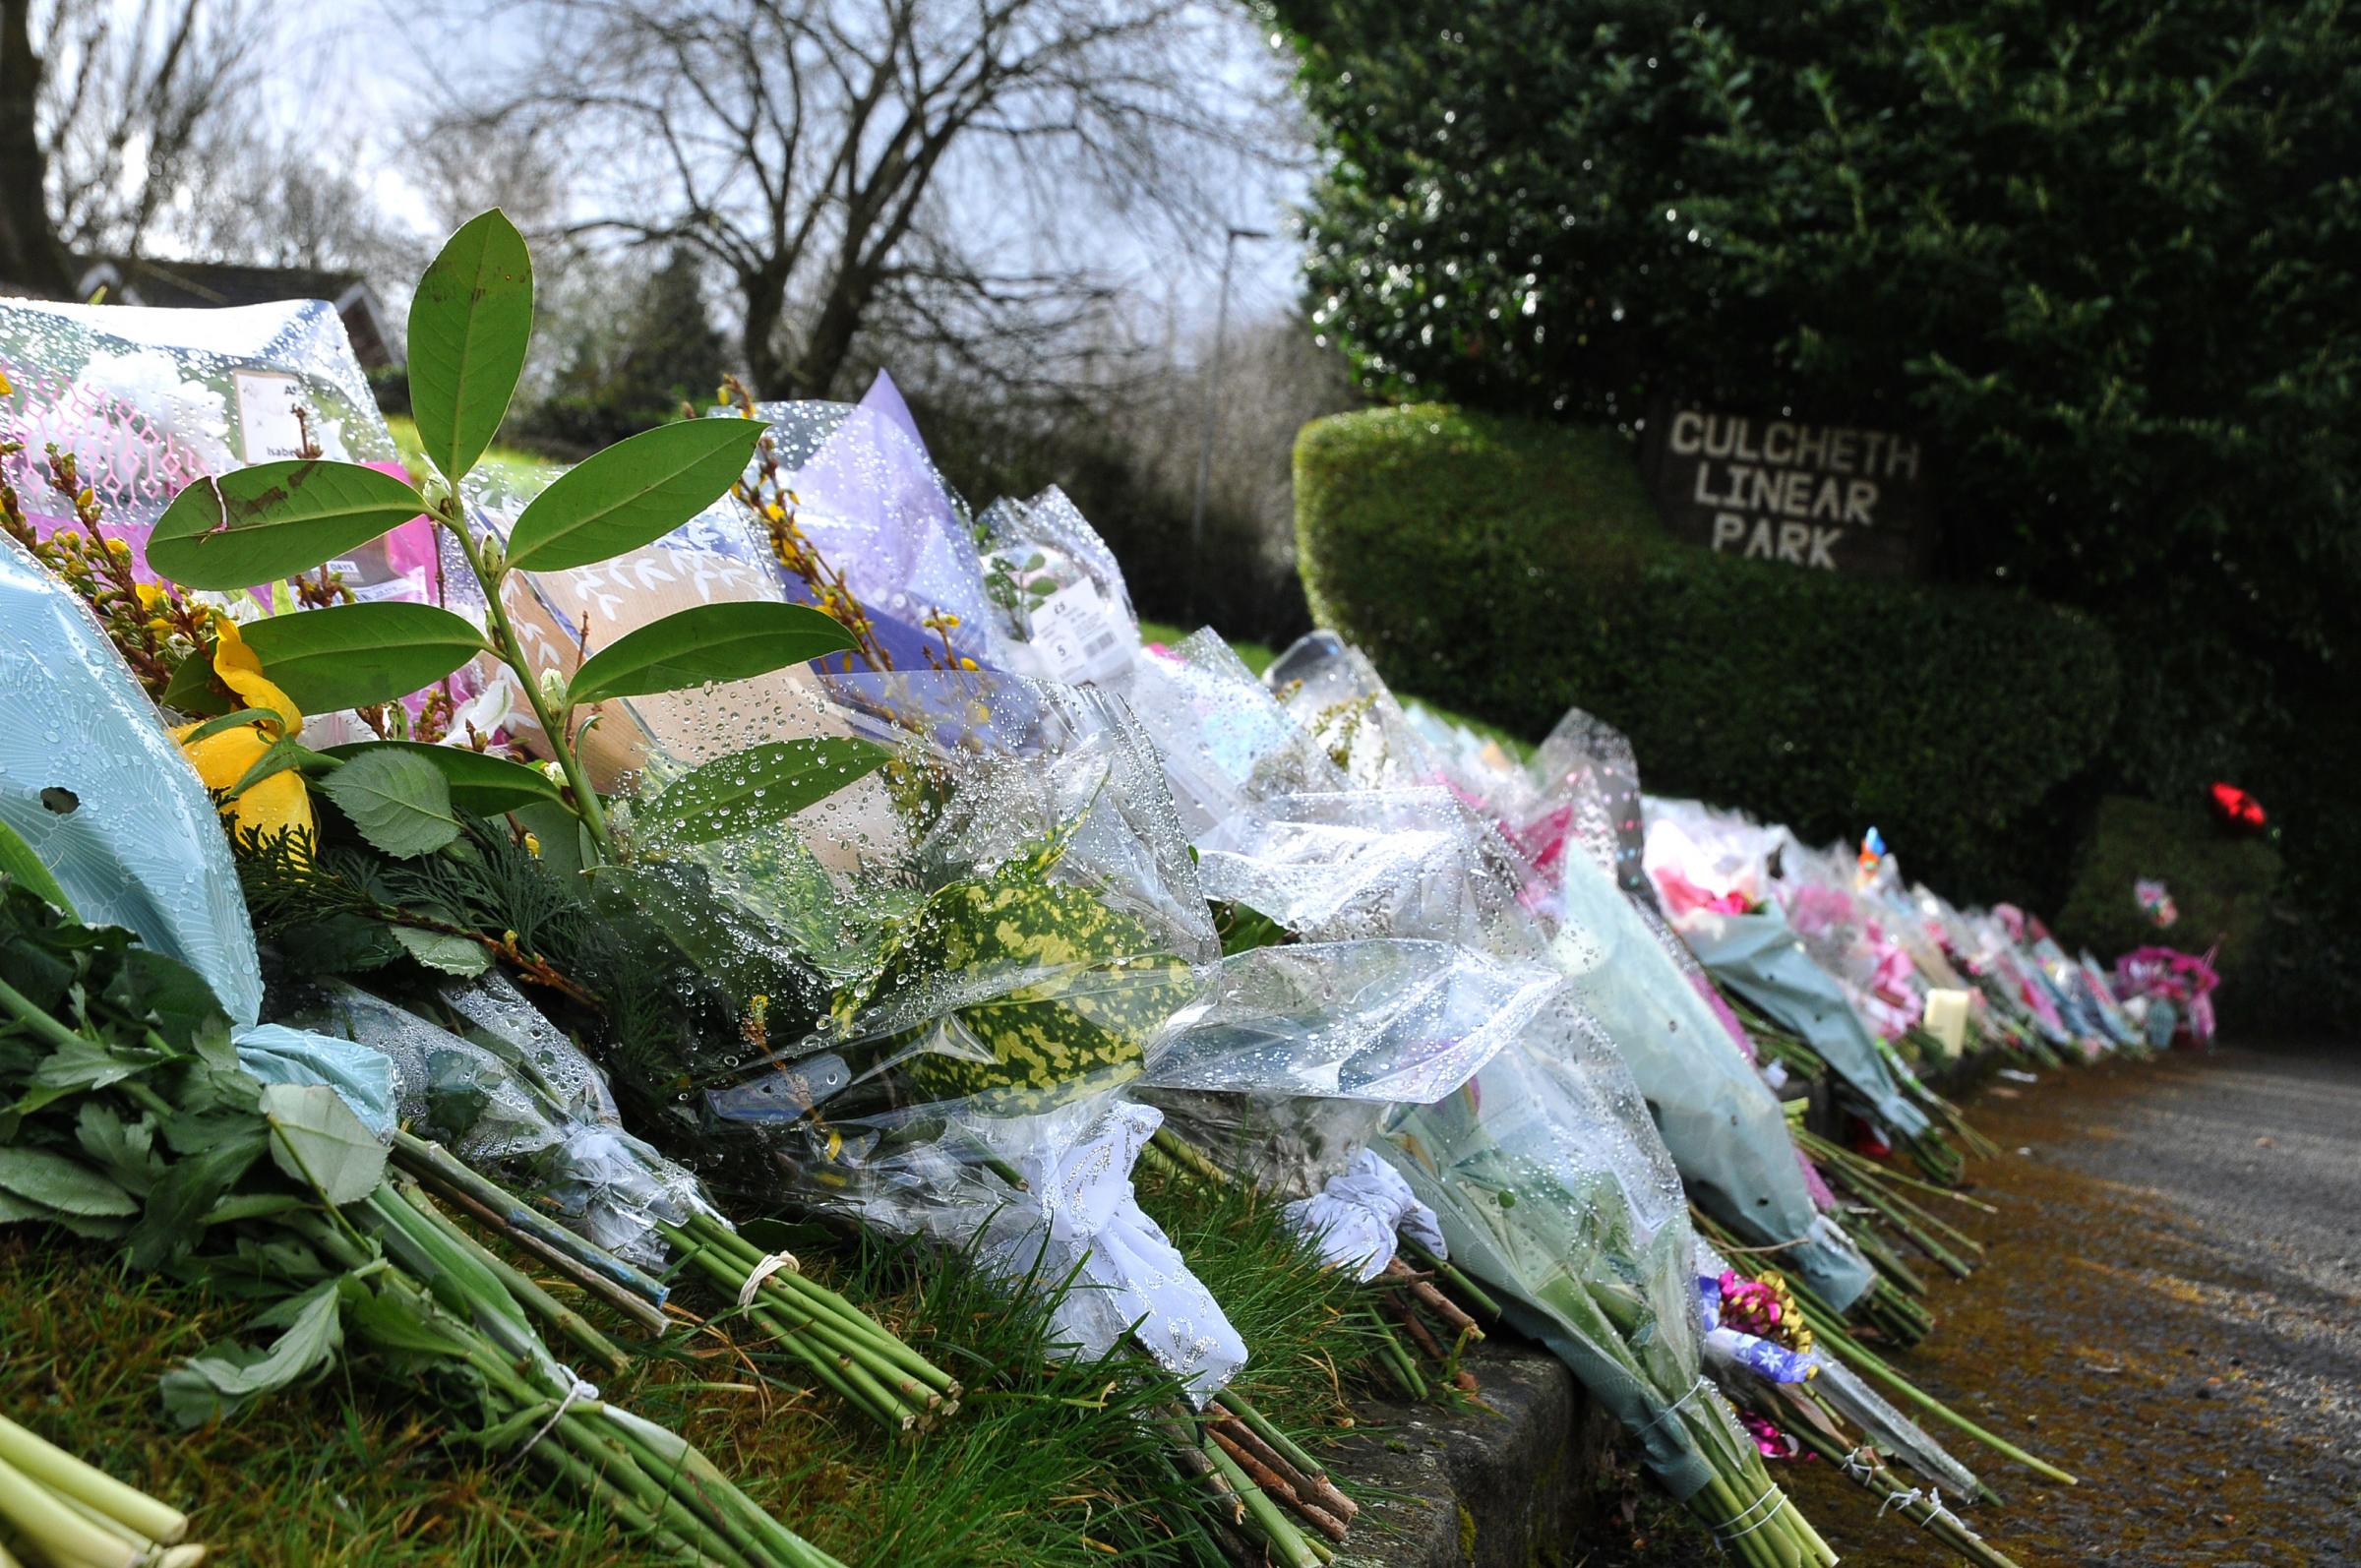 Floral tributes were left at the scene at Culcheth Linear Park following the murder